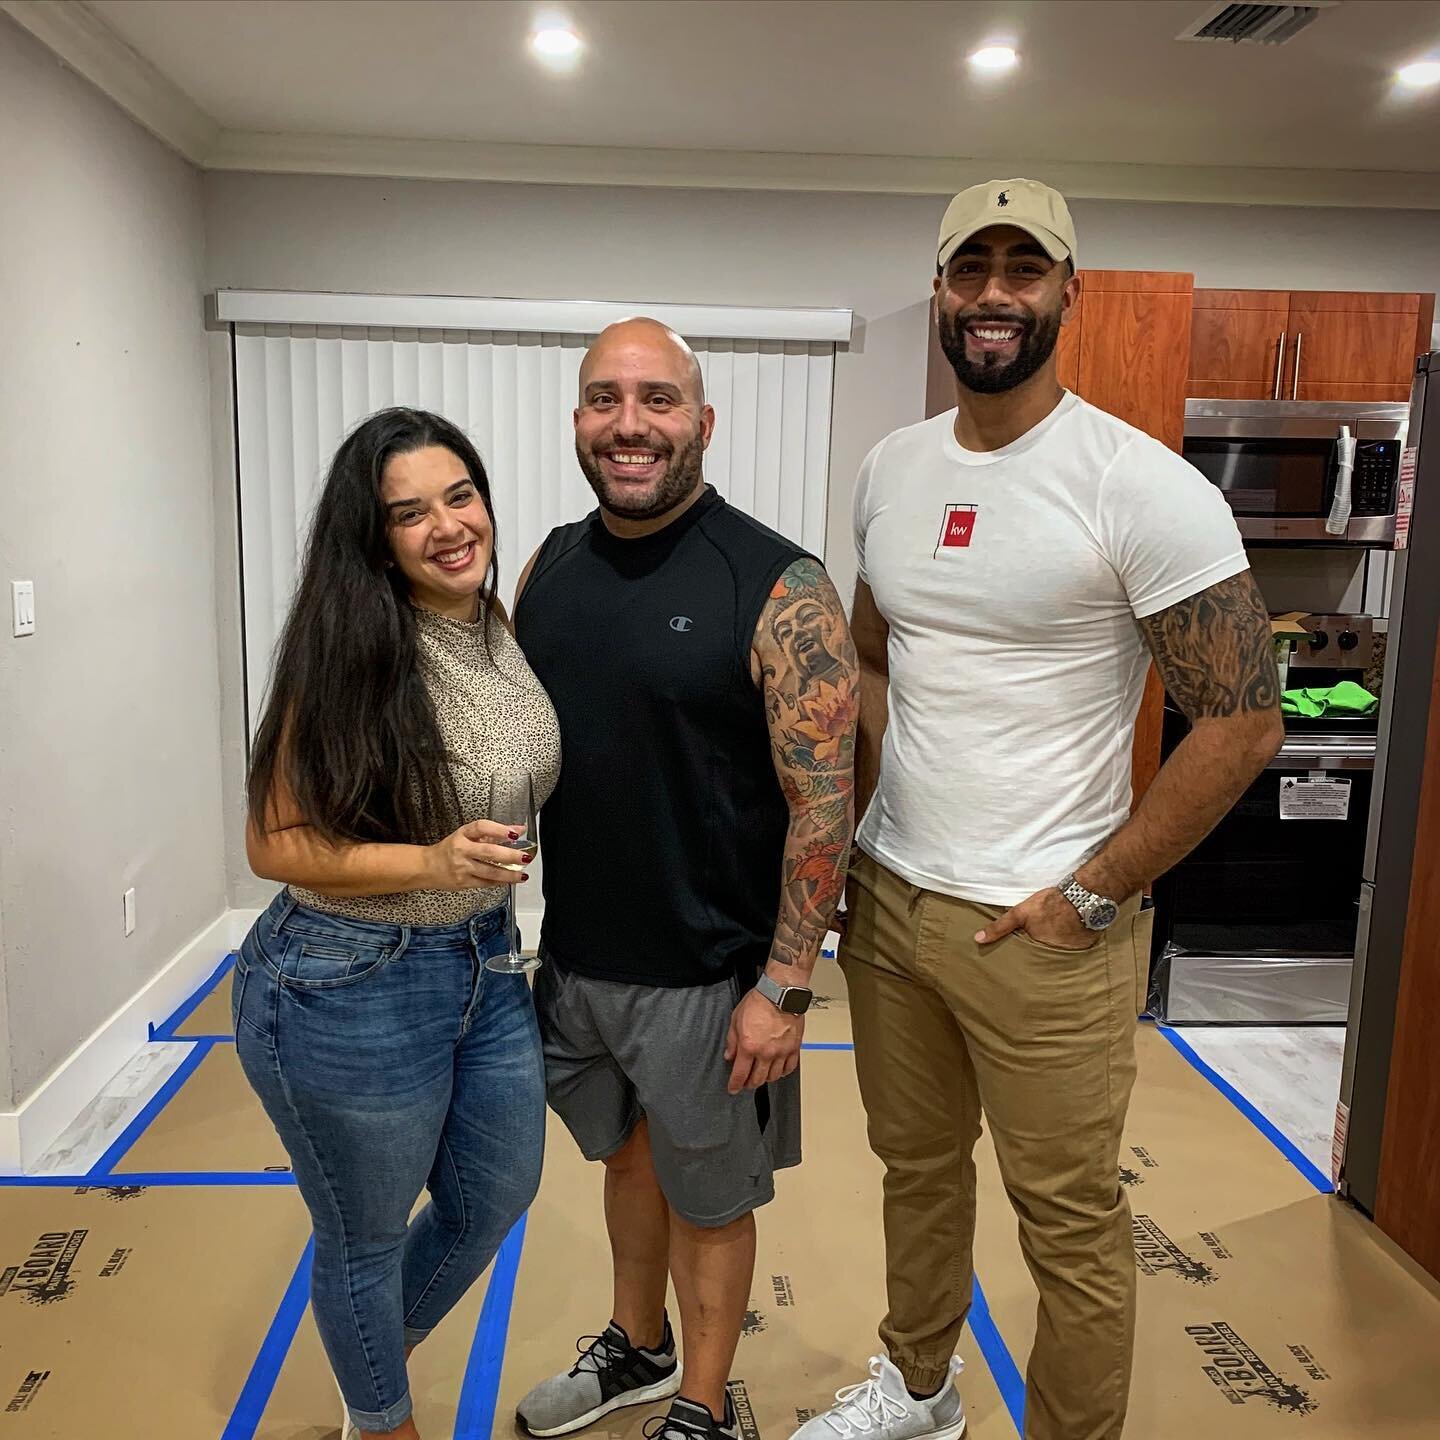 Closing Day for this amazing couple! They came to me with a goal and trusted me to deliver their first home together, it wasn&rsquo;t easy but their determination was impeccable! They were looking for the right home to add the right touches and make 